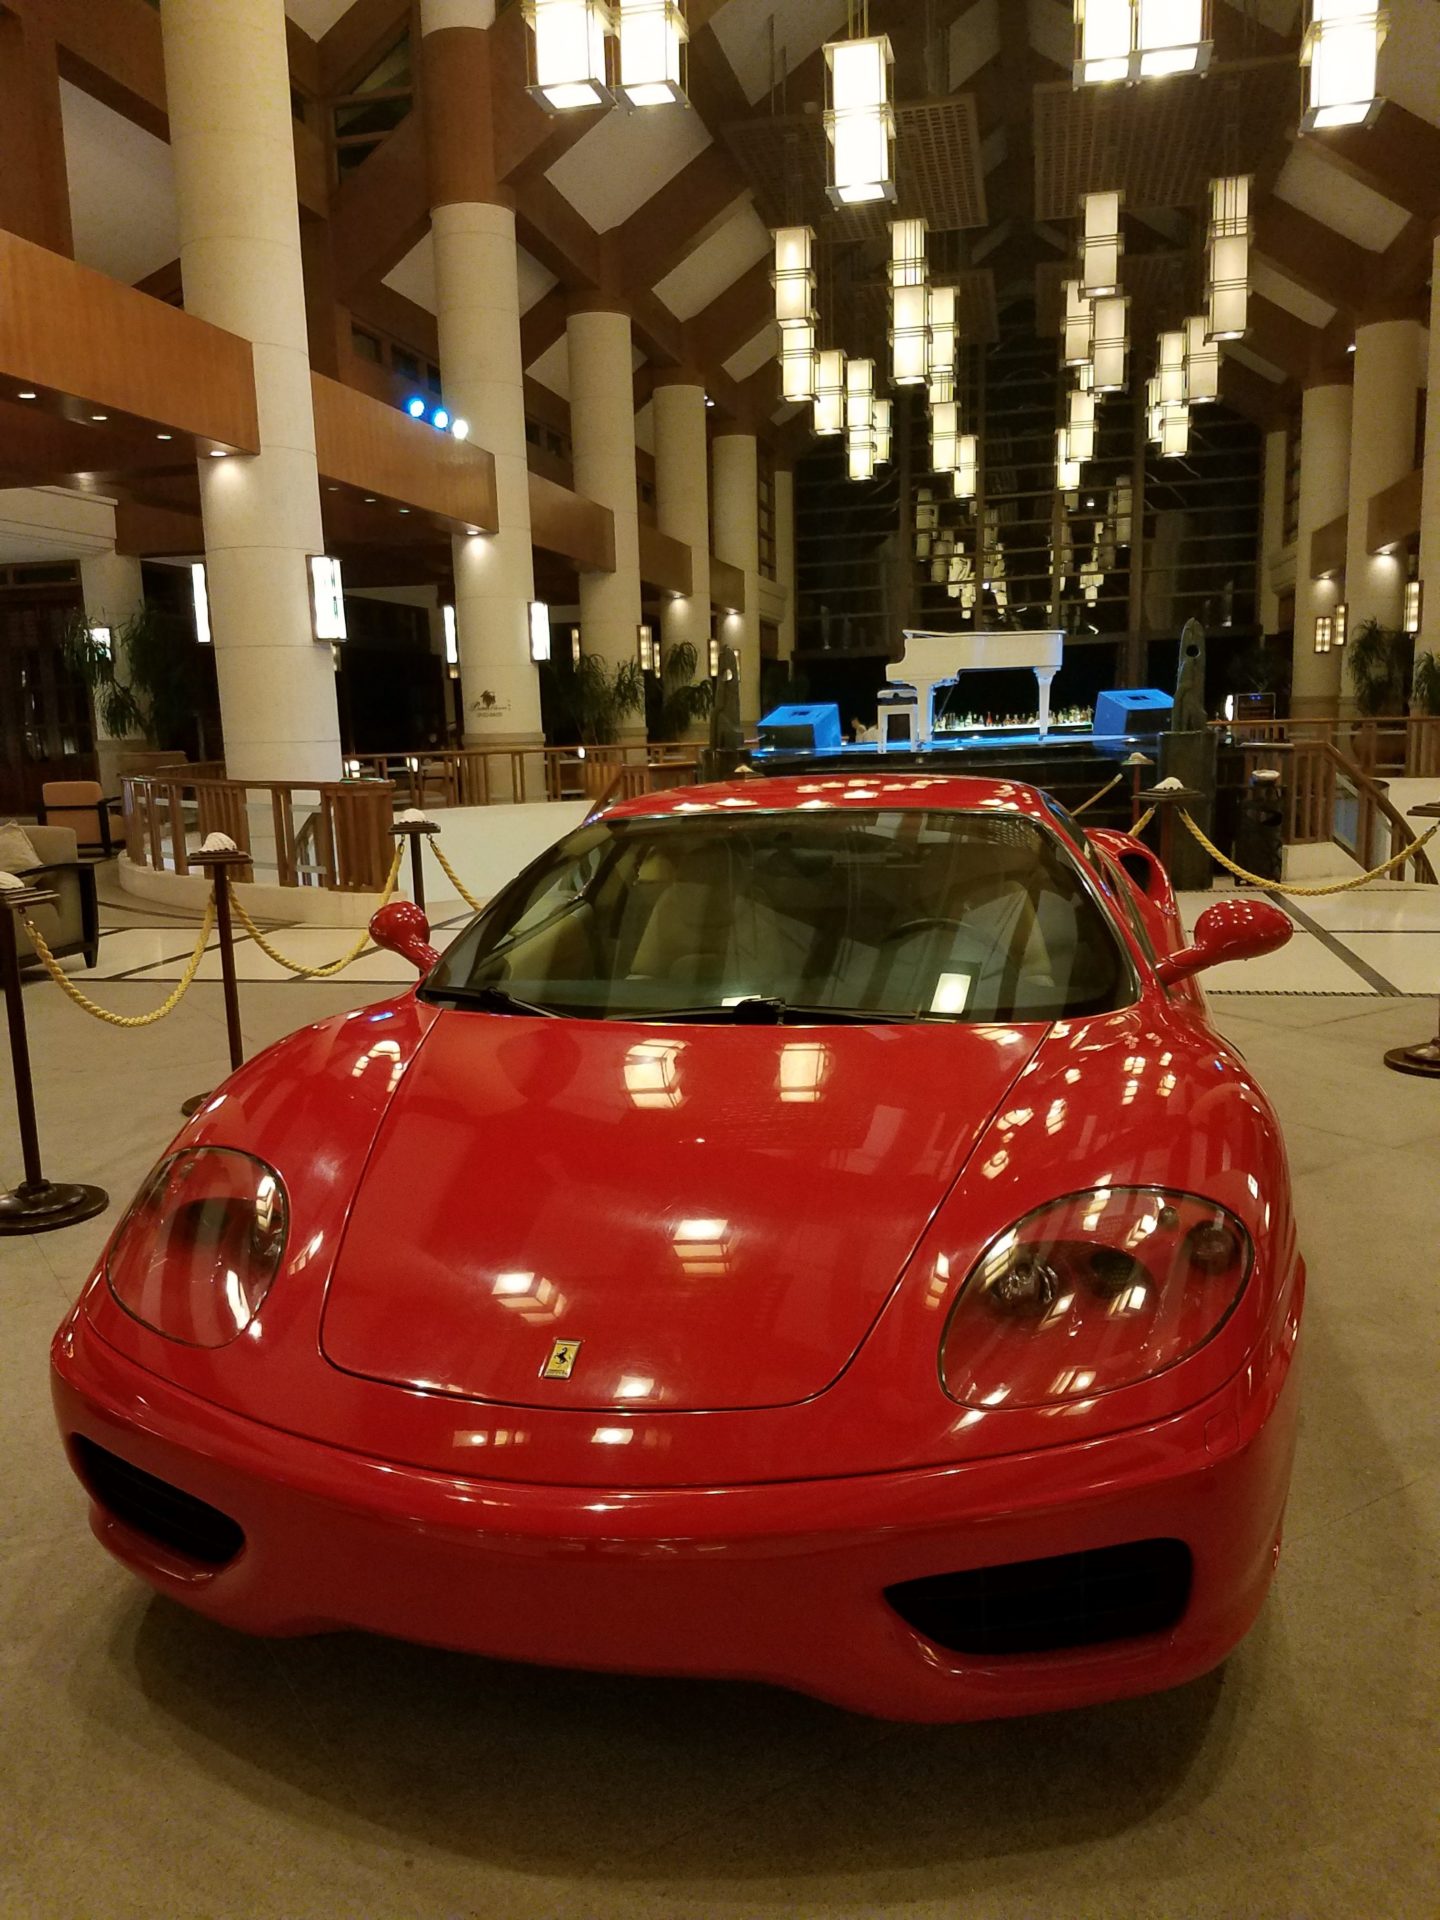 a red sports car in a large building